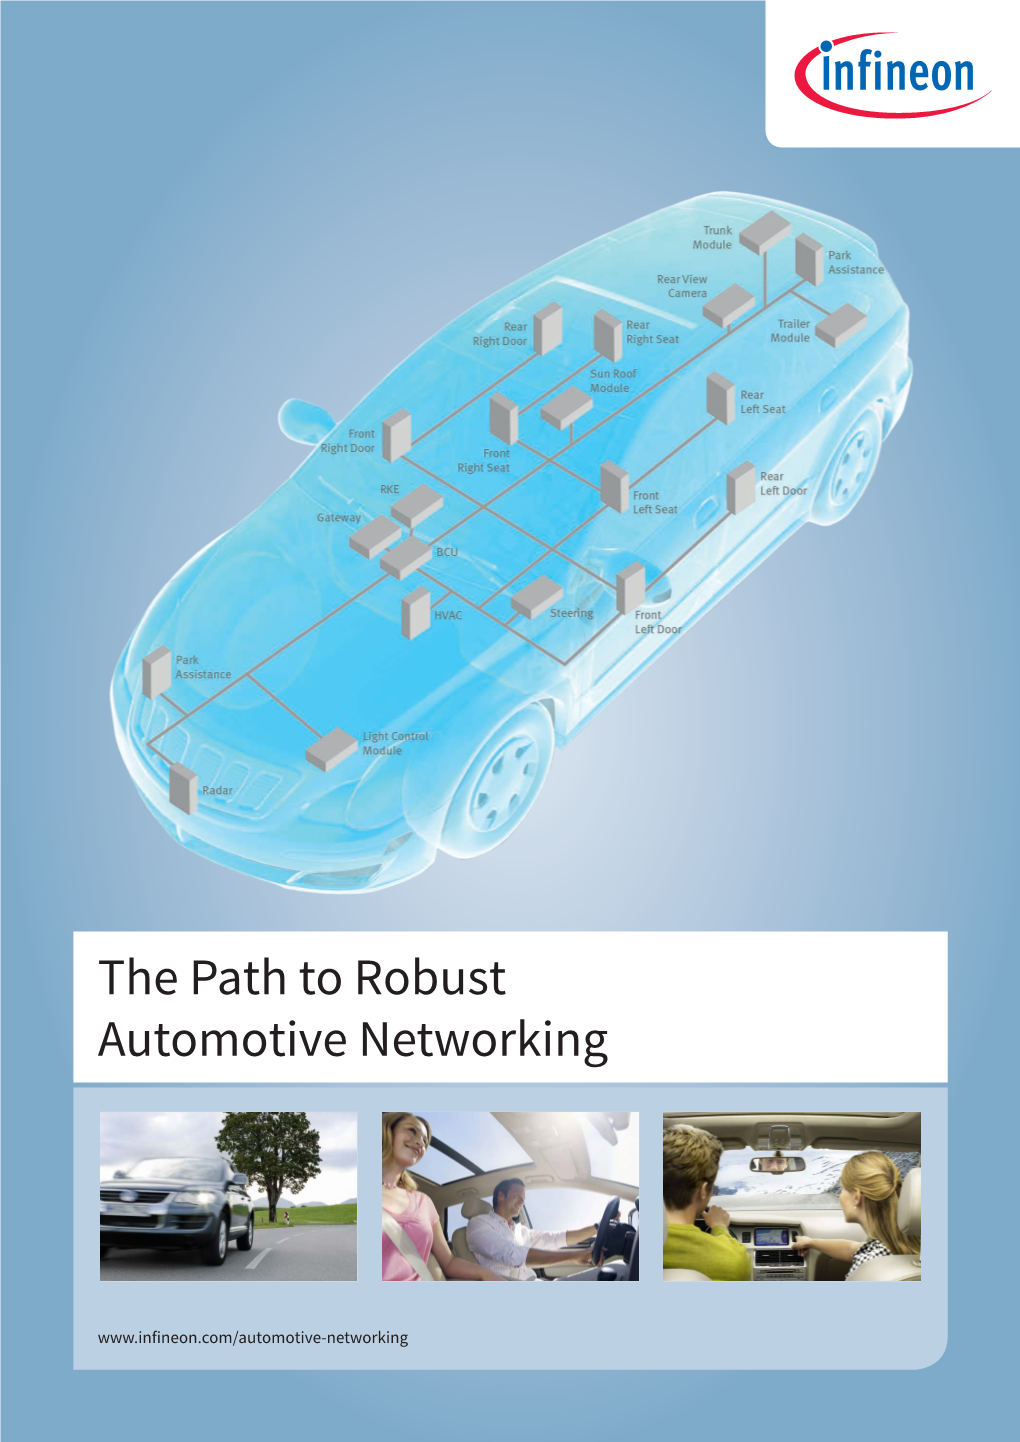 The Path to Robust Automotive Networking